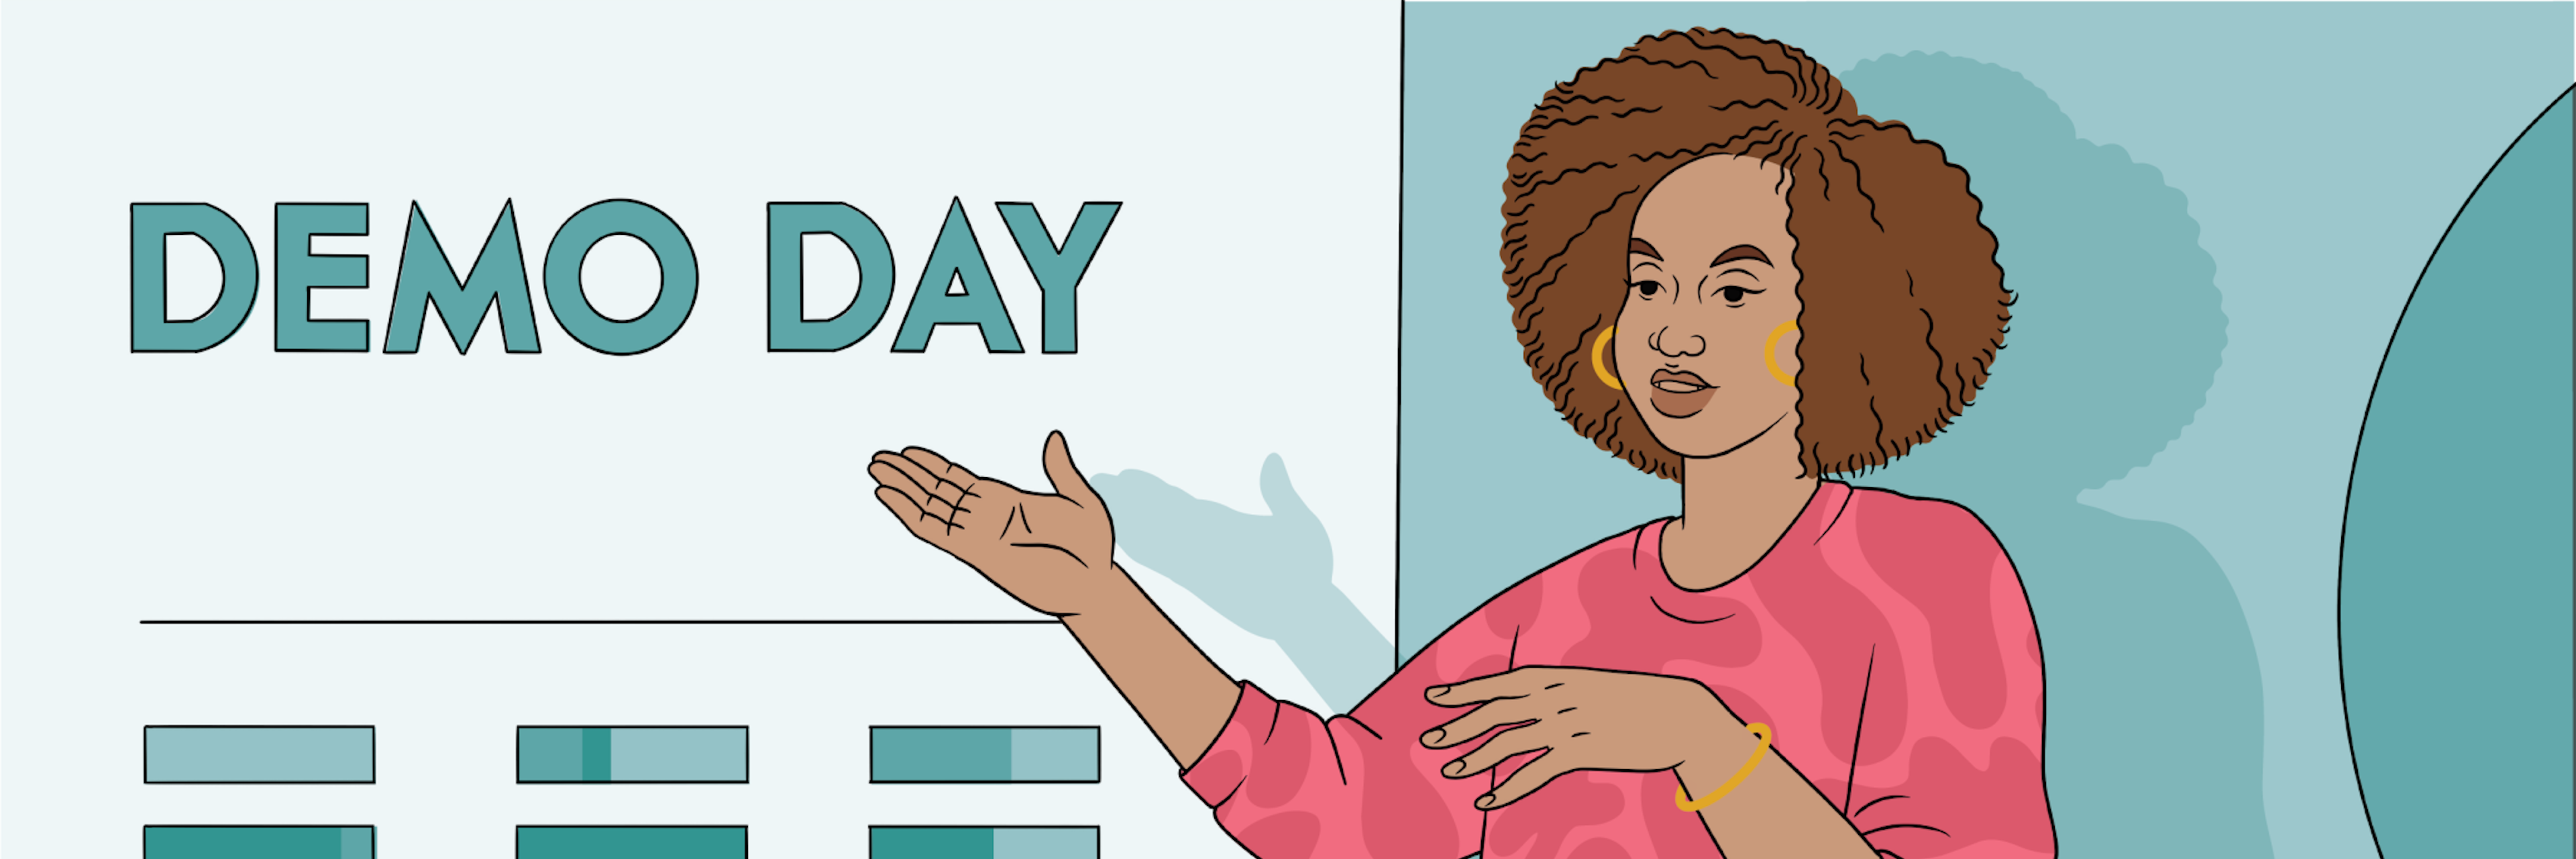 An illustrated image of a woman presenting at a demo day